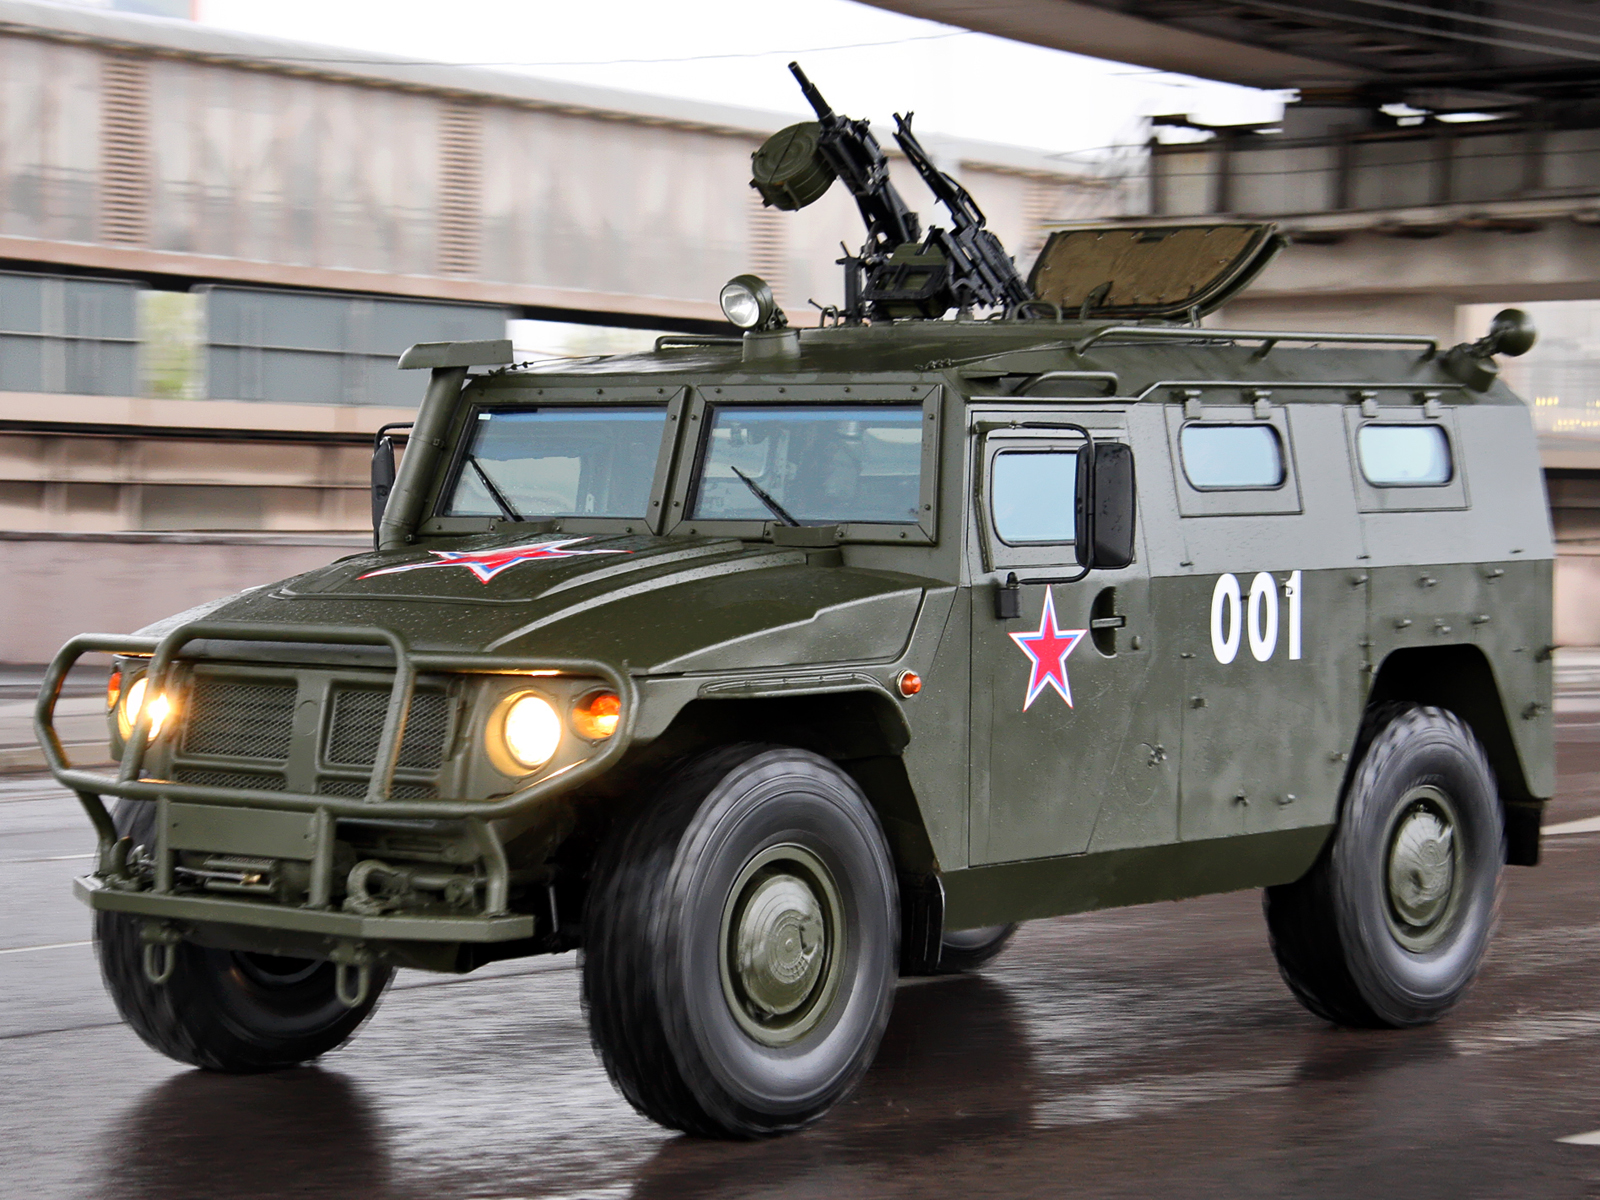 2008, Gaz, Its, Gas, 233014, 4x4, Military, Weapon, Weapons Wallpaper